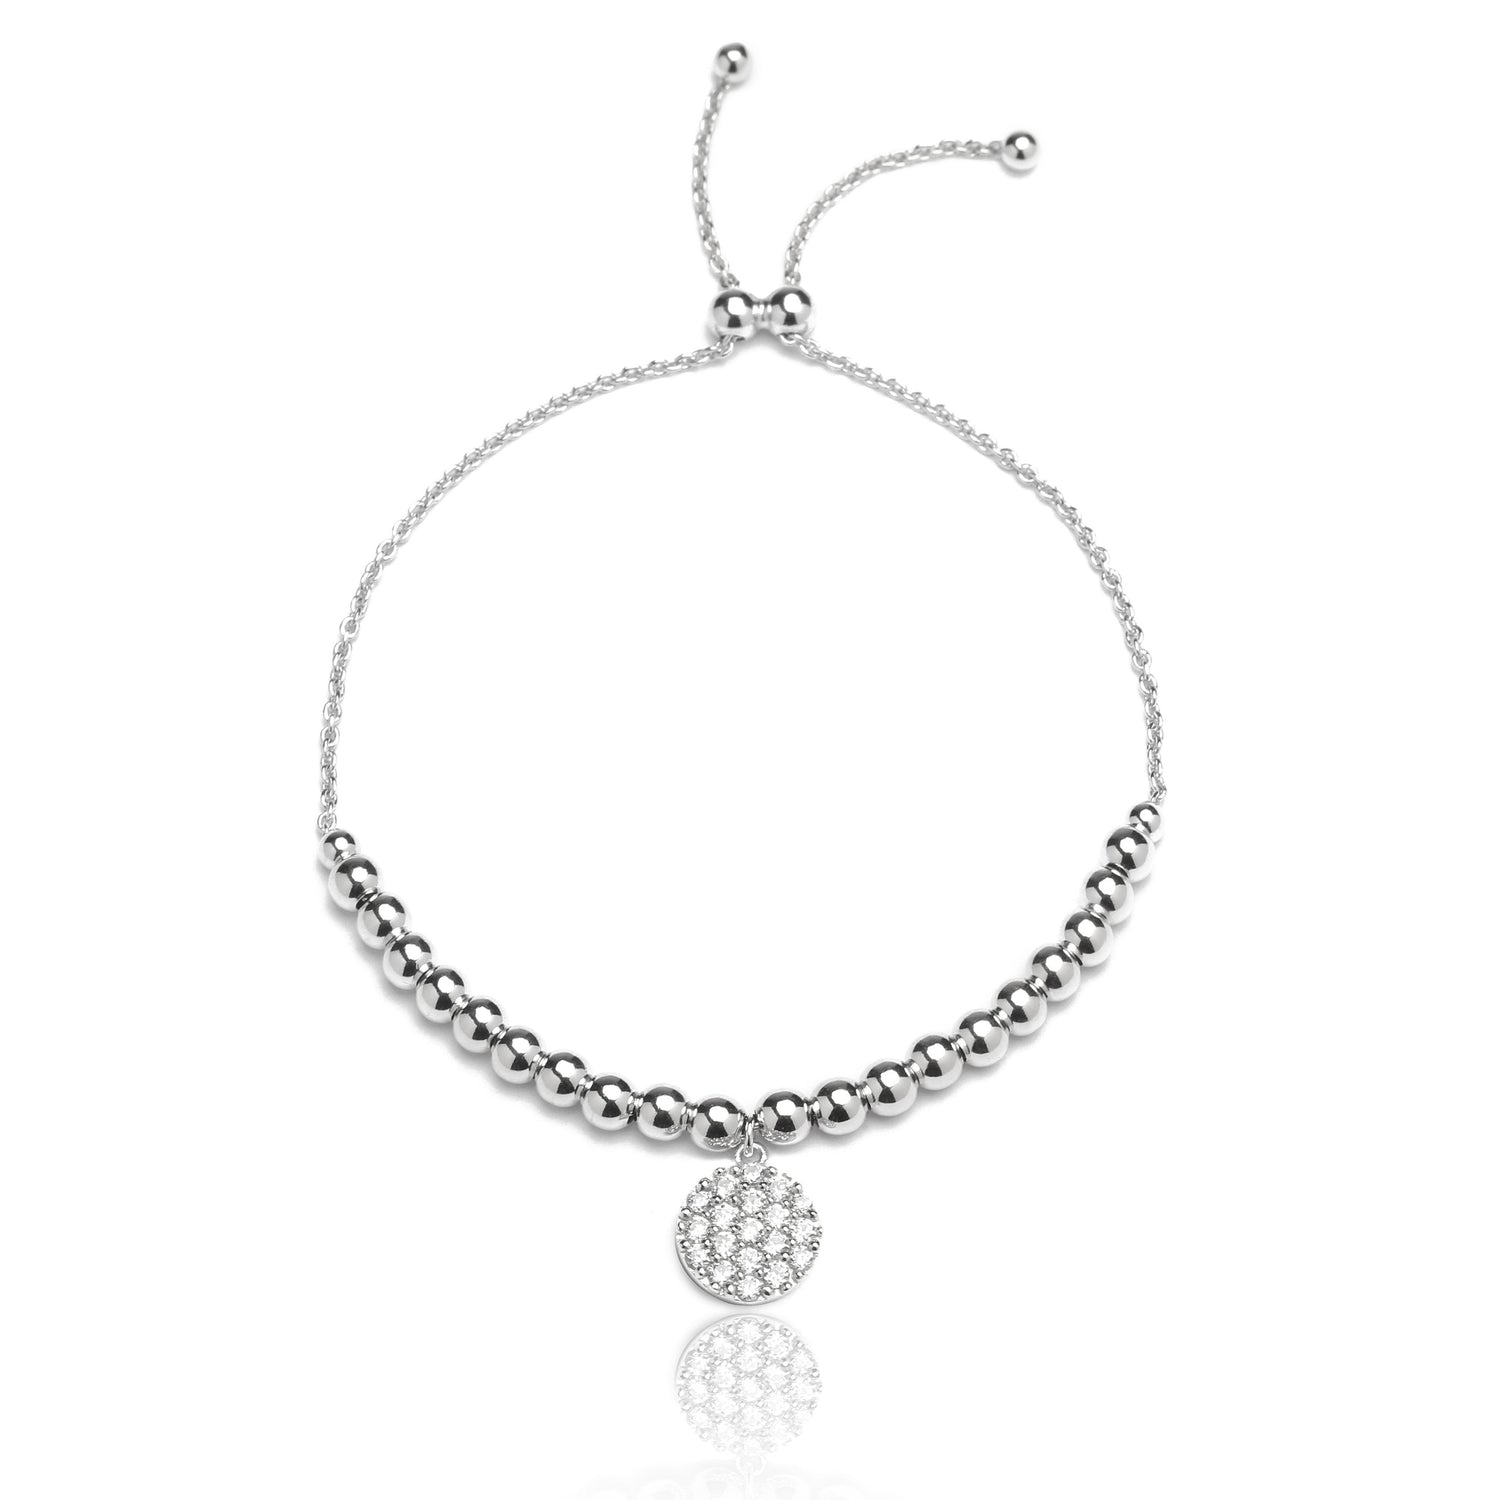 Sterling Silver Adjustable Bracelet with Cubic Zirconia Disc Charm and Beads